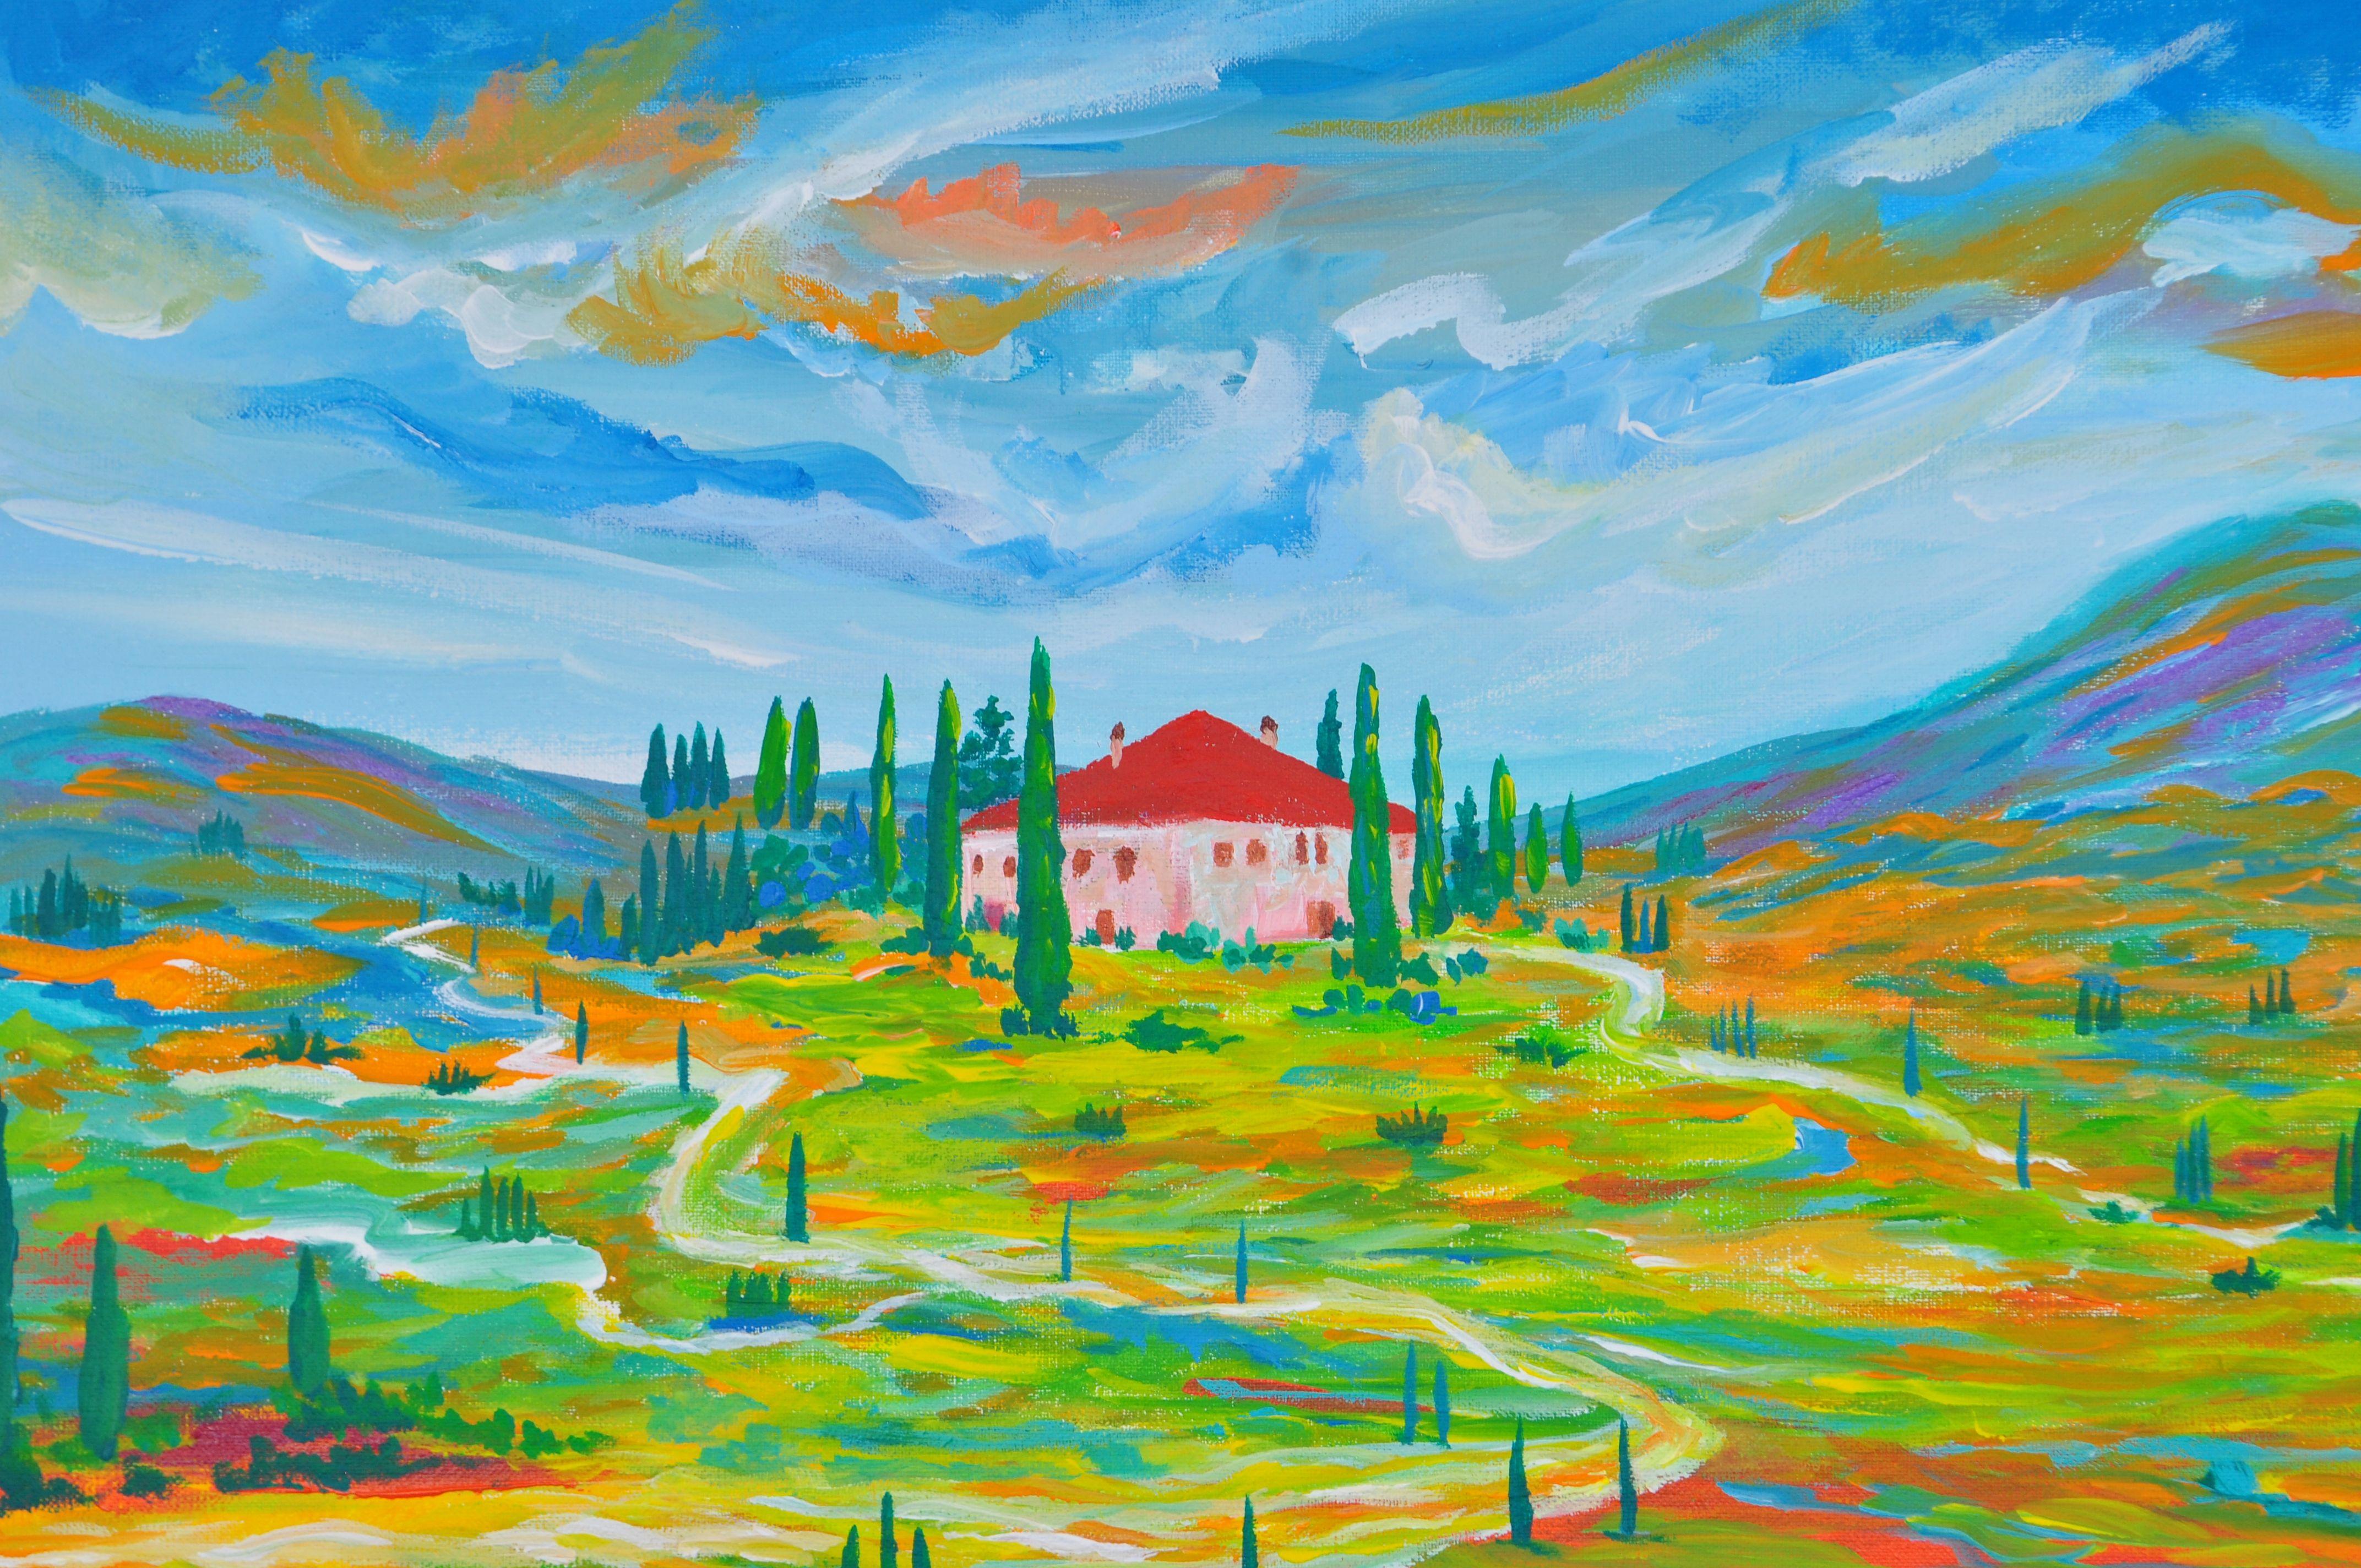 Zelie likes to capture the charm of Tuscany landscape. She uses bright and bold colour on her painting. When she travels to Tuscany and go out for a drive, she will be always looking for scenery that she can paint. This painting was no exception.   